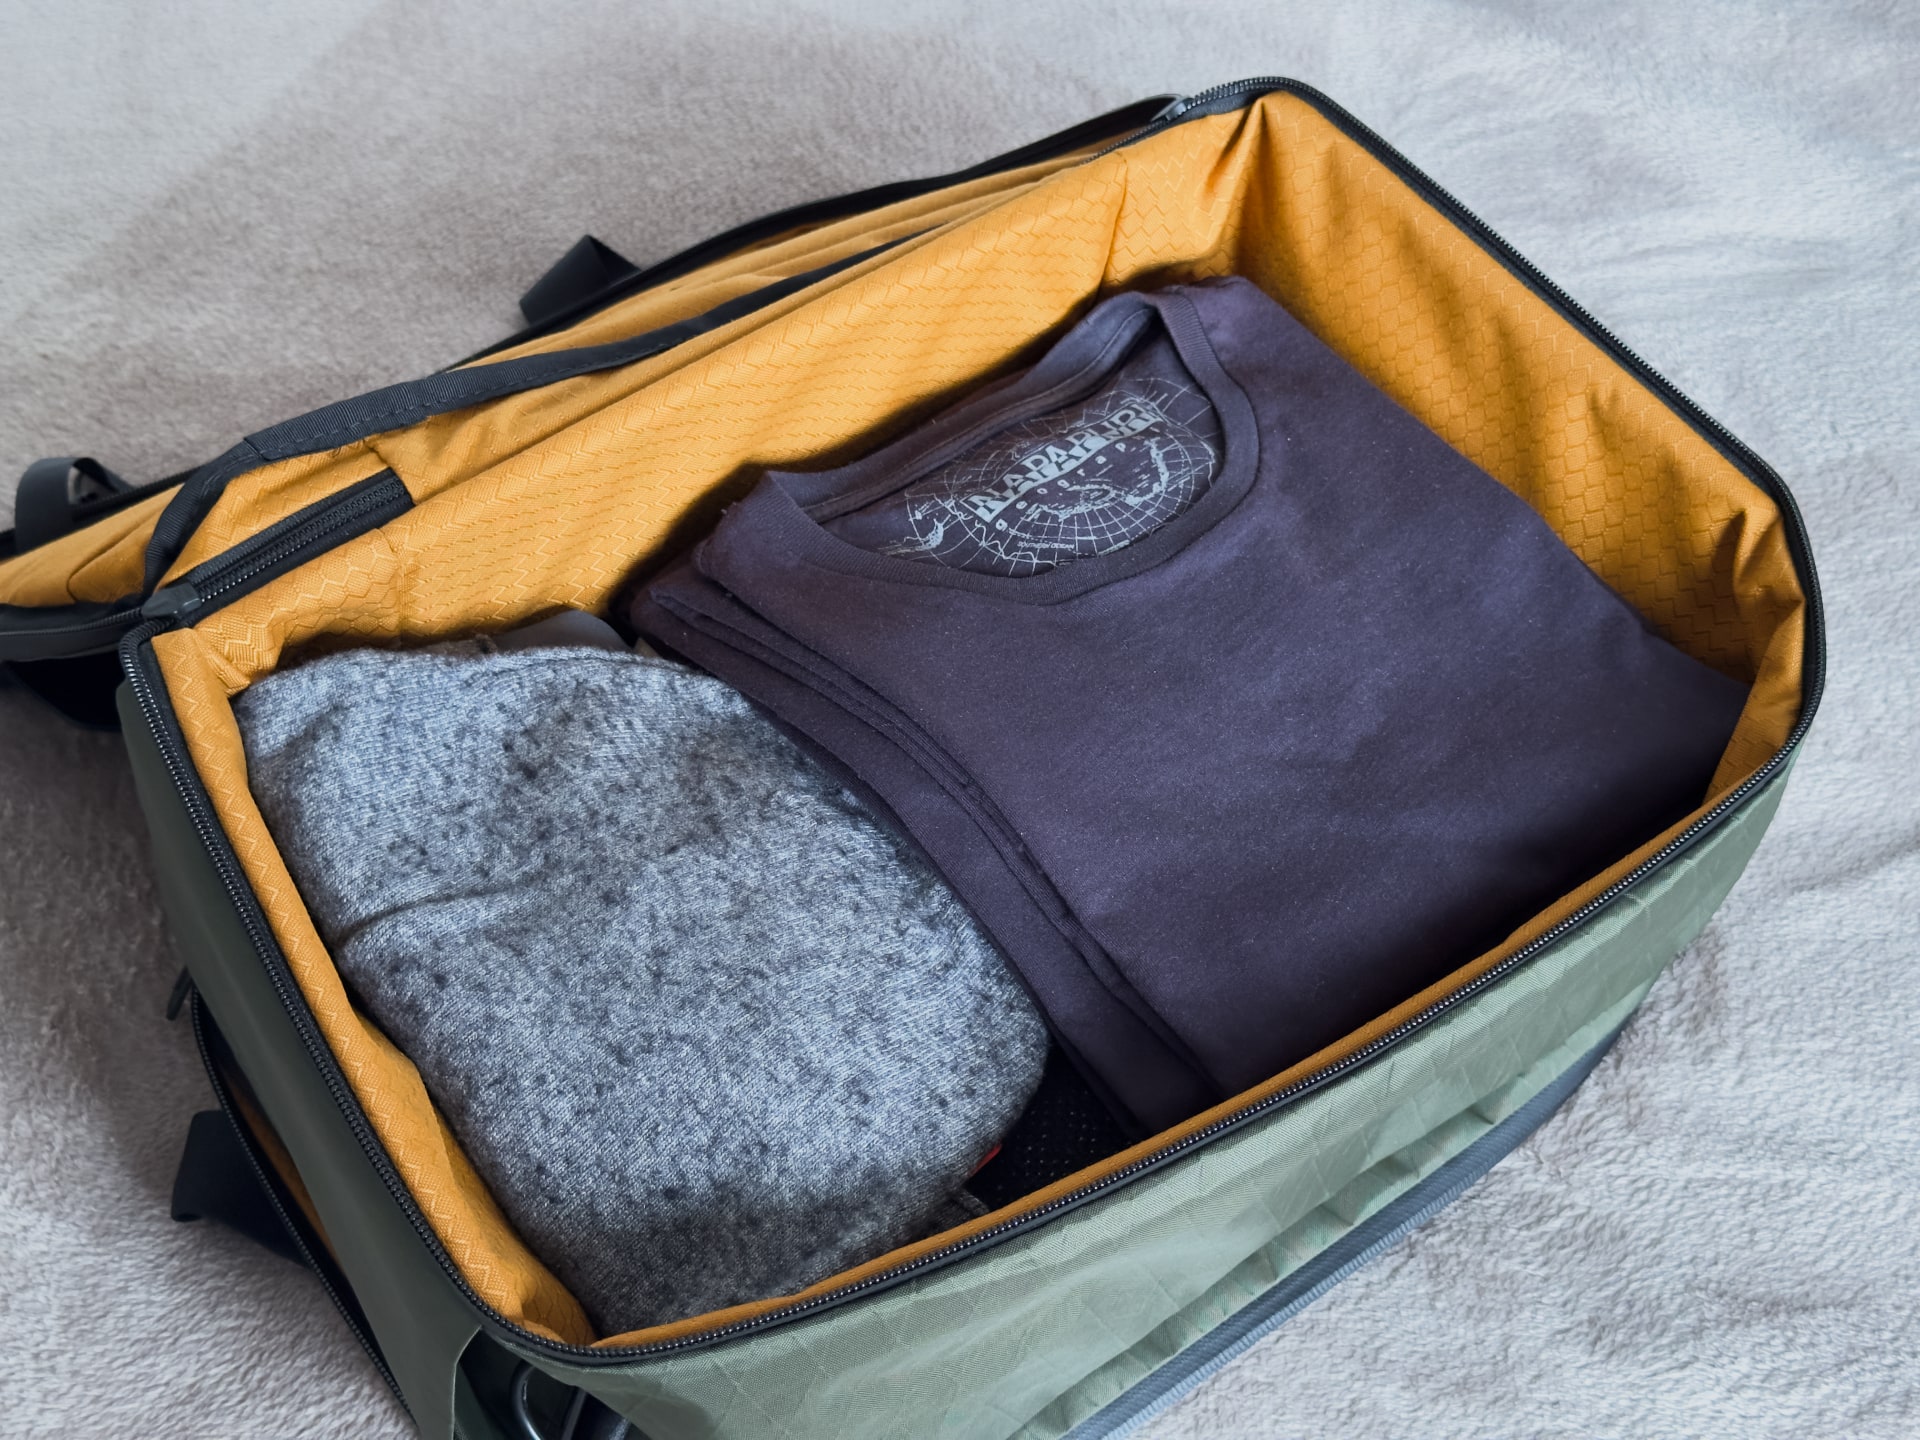 Wardrobe in the clothing compartment of Waterfield's X-Air Duffel travel bag